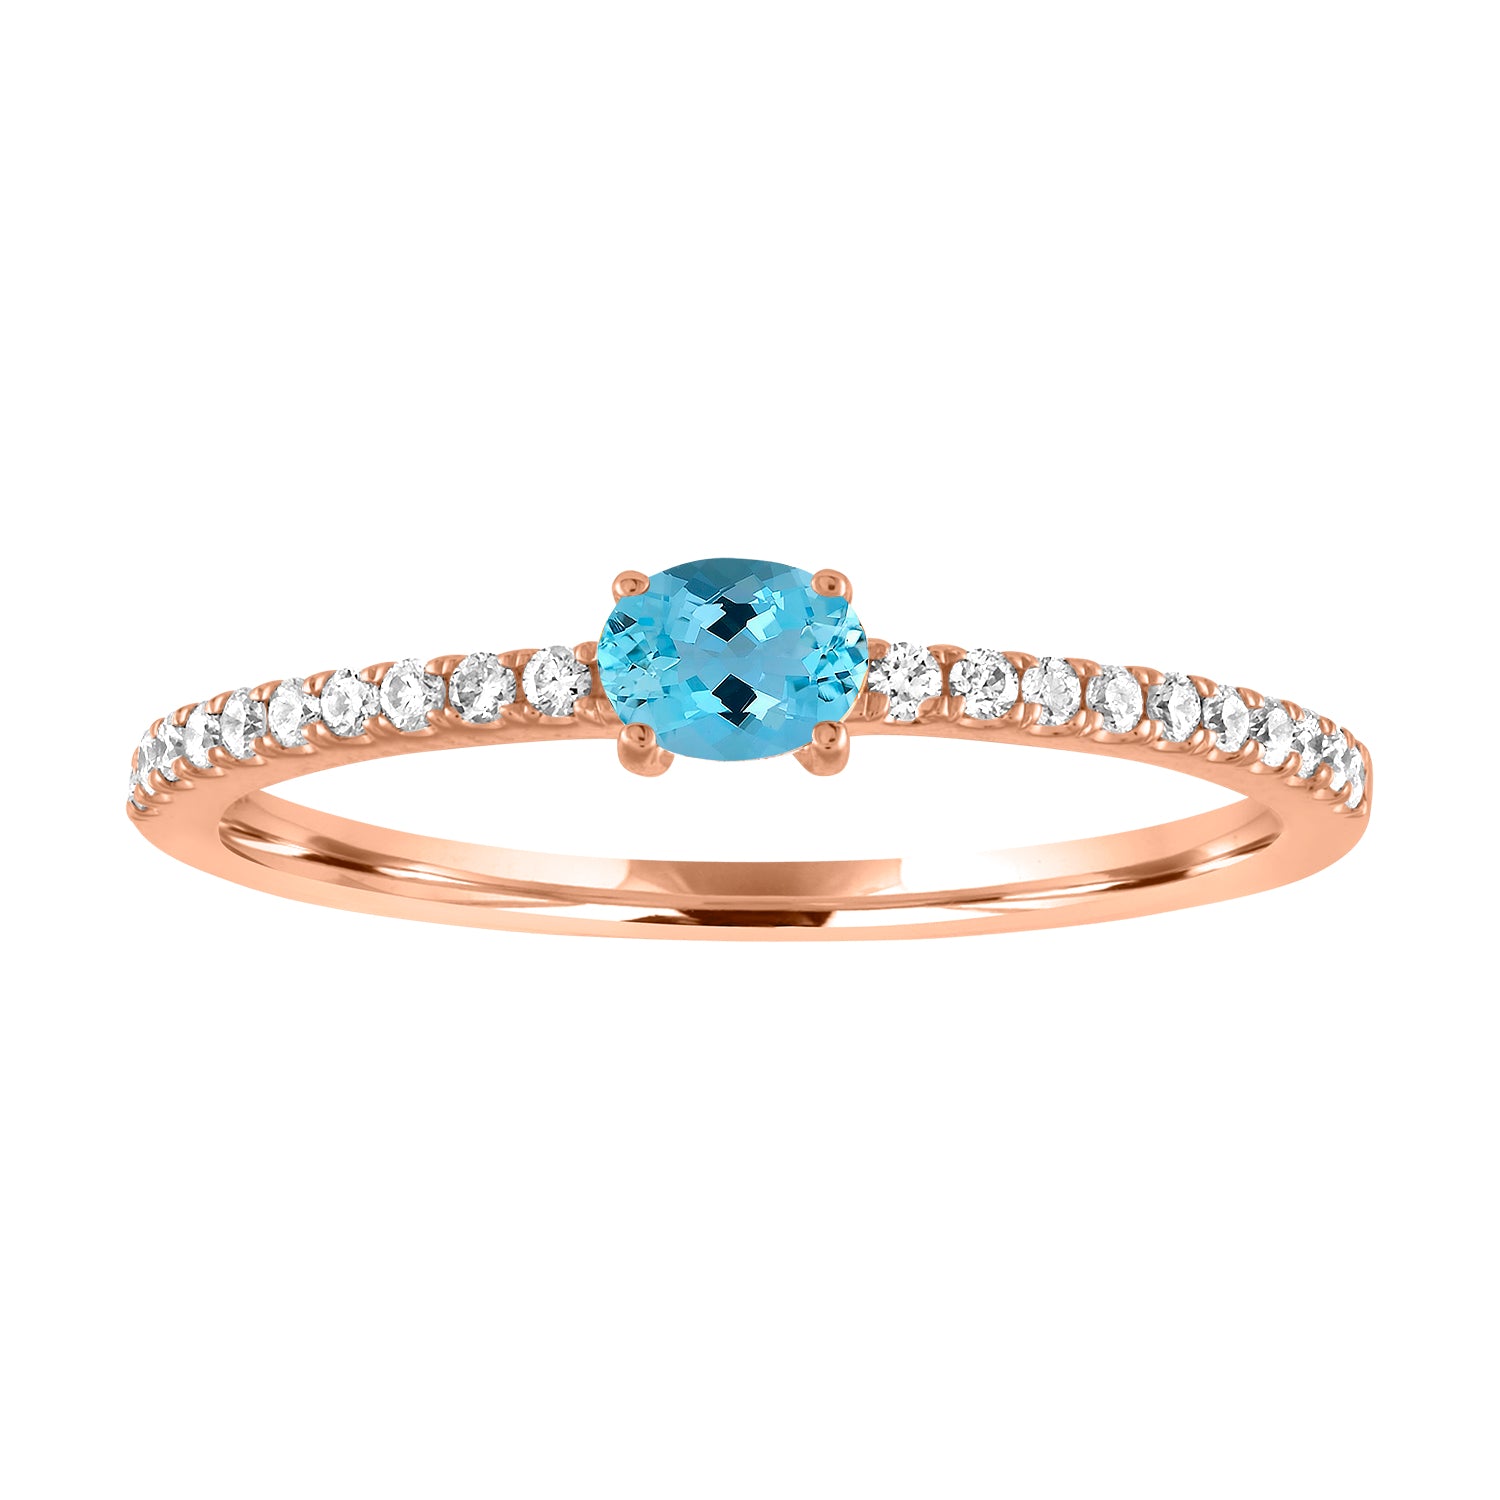 Rose gold skinny band with an oval aquamarine in the center and round diamonds along the shank.